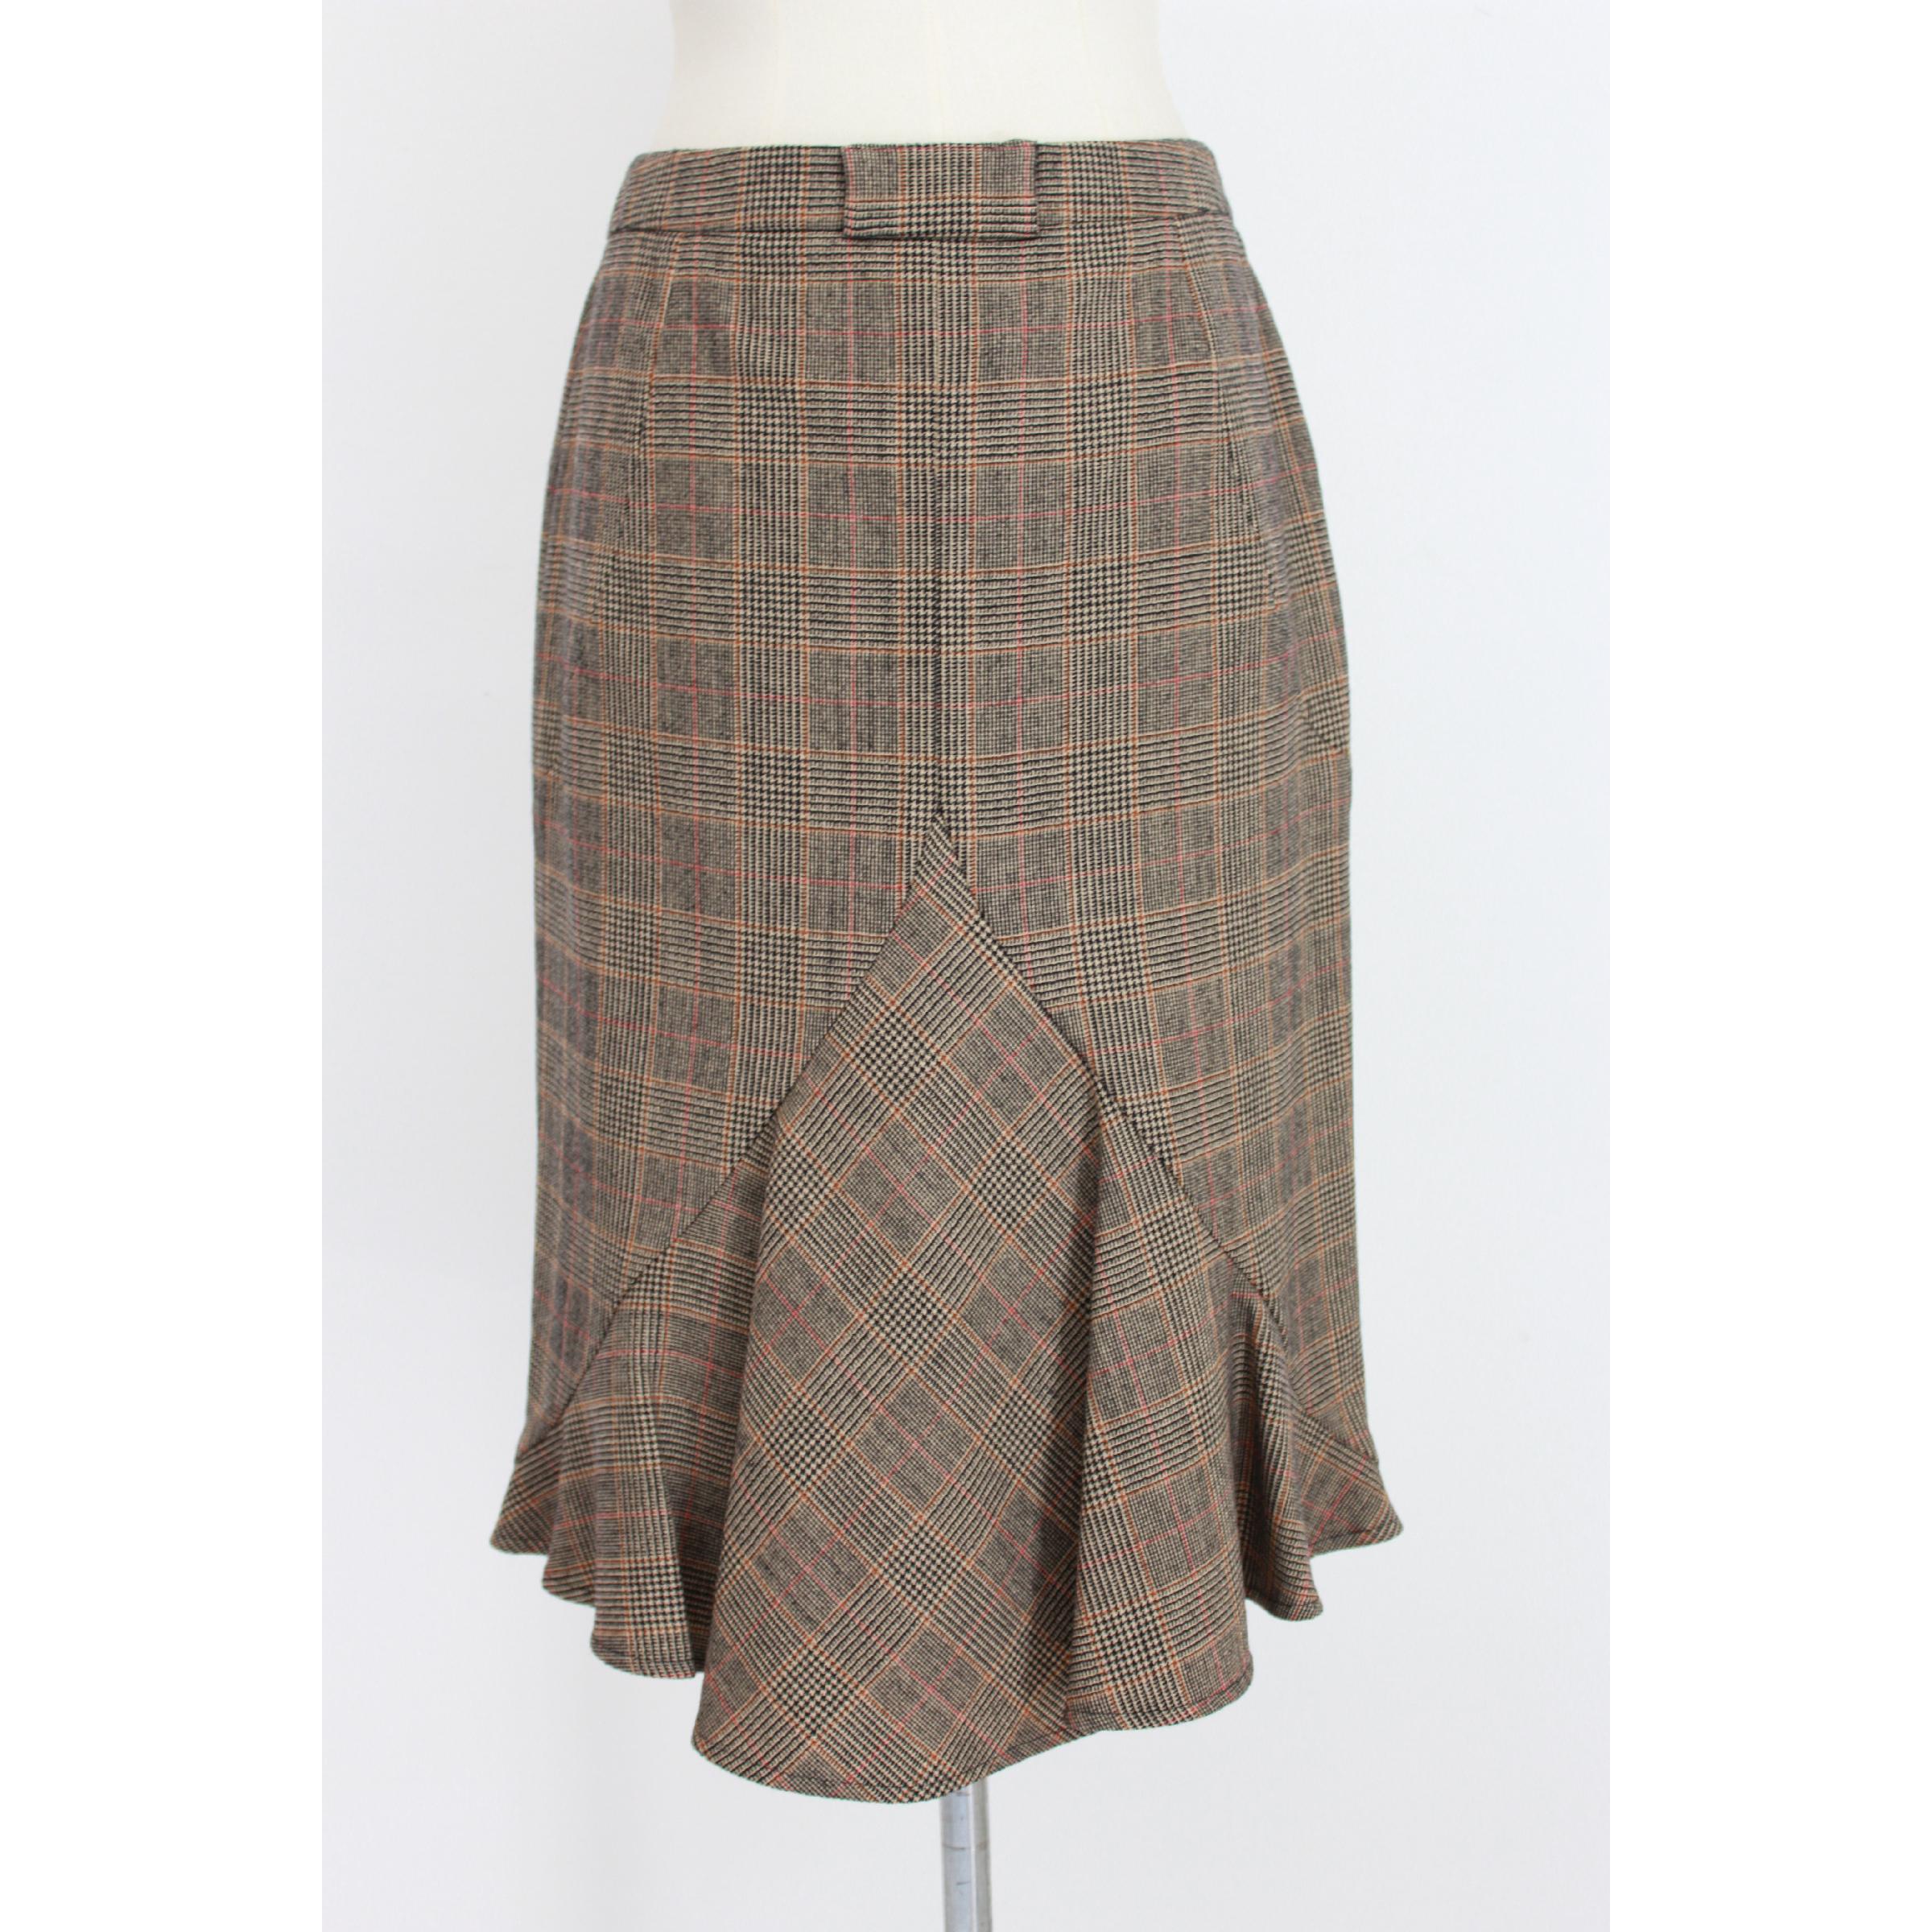 Valentino Roma vintage godet skirt. Beige and black color tartan pattern, 98% virgin wool 2% elastene. Longer flared pattern behind. 90s. Made in Italy. New with tag.

Size: 46 It 12 Us 14 Uk

Waist: 44 cm
Length: 68 cm